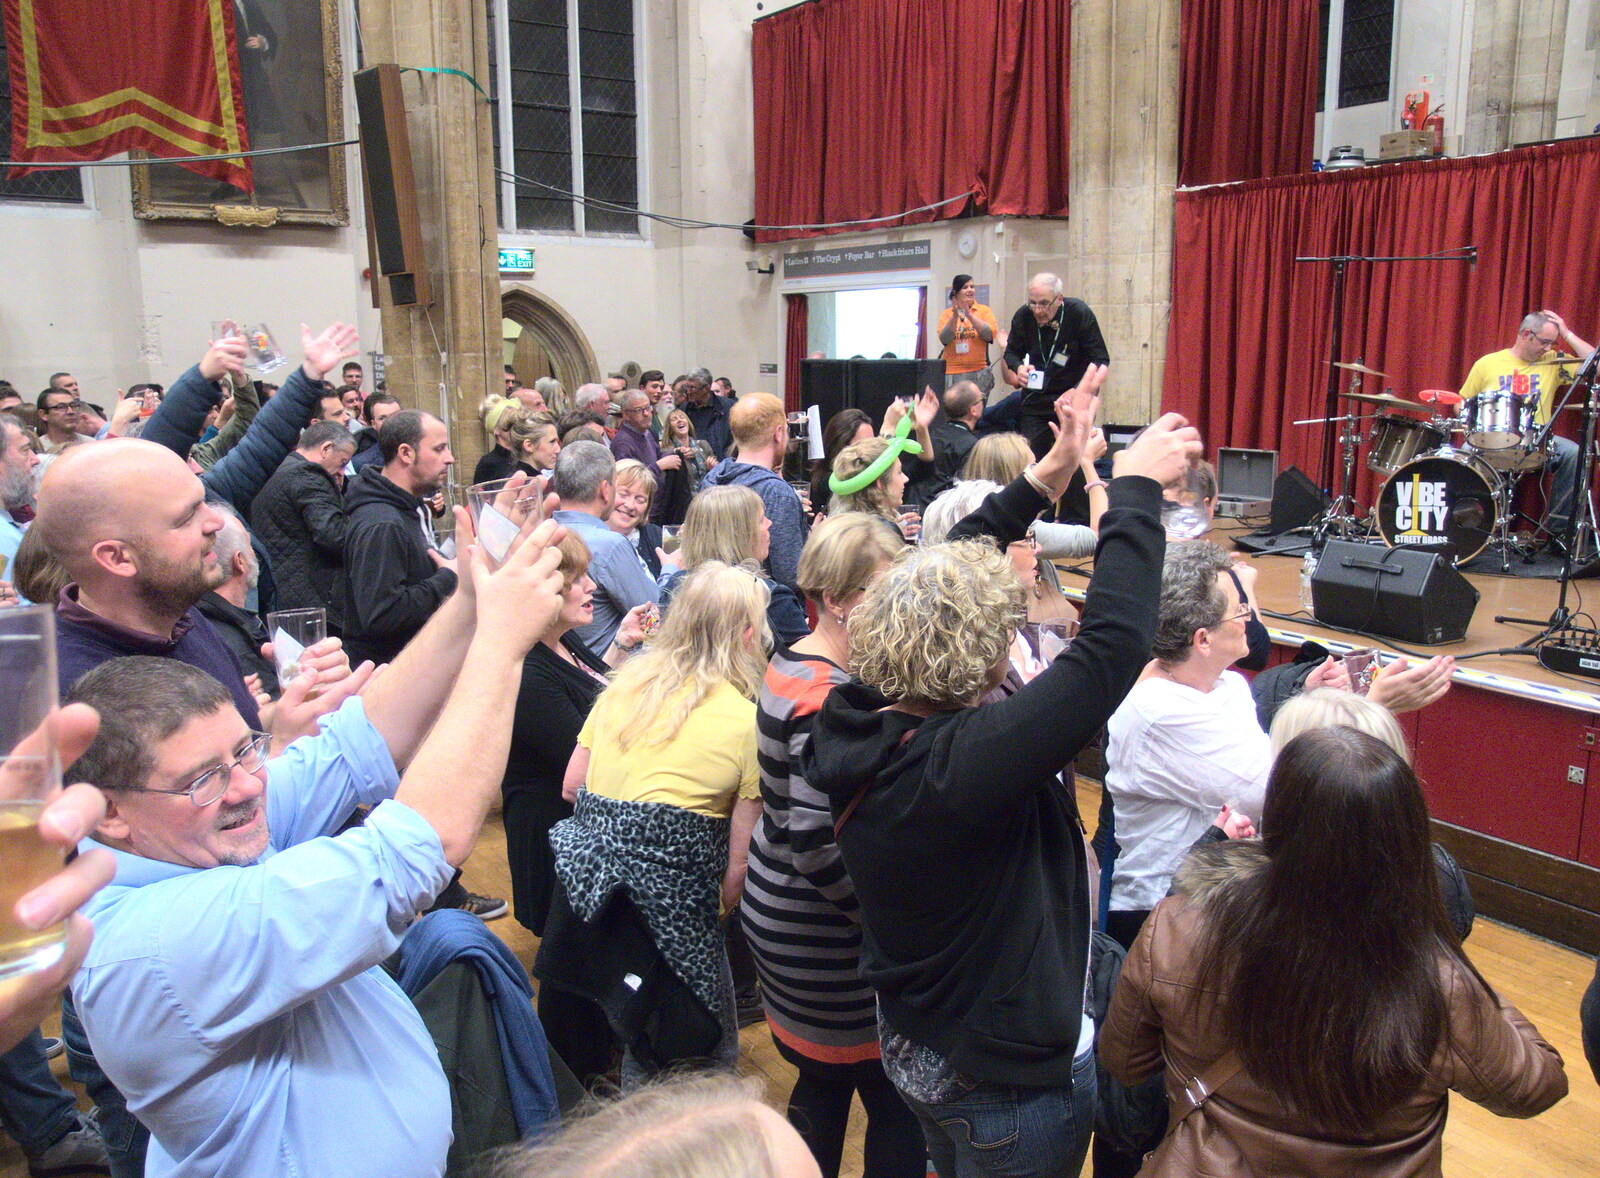 Applause for Vibe City from The Norwich Beer Festival, St. Andrew's Hall, Norwich, Norfolk - 26th October 2016